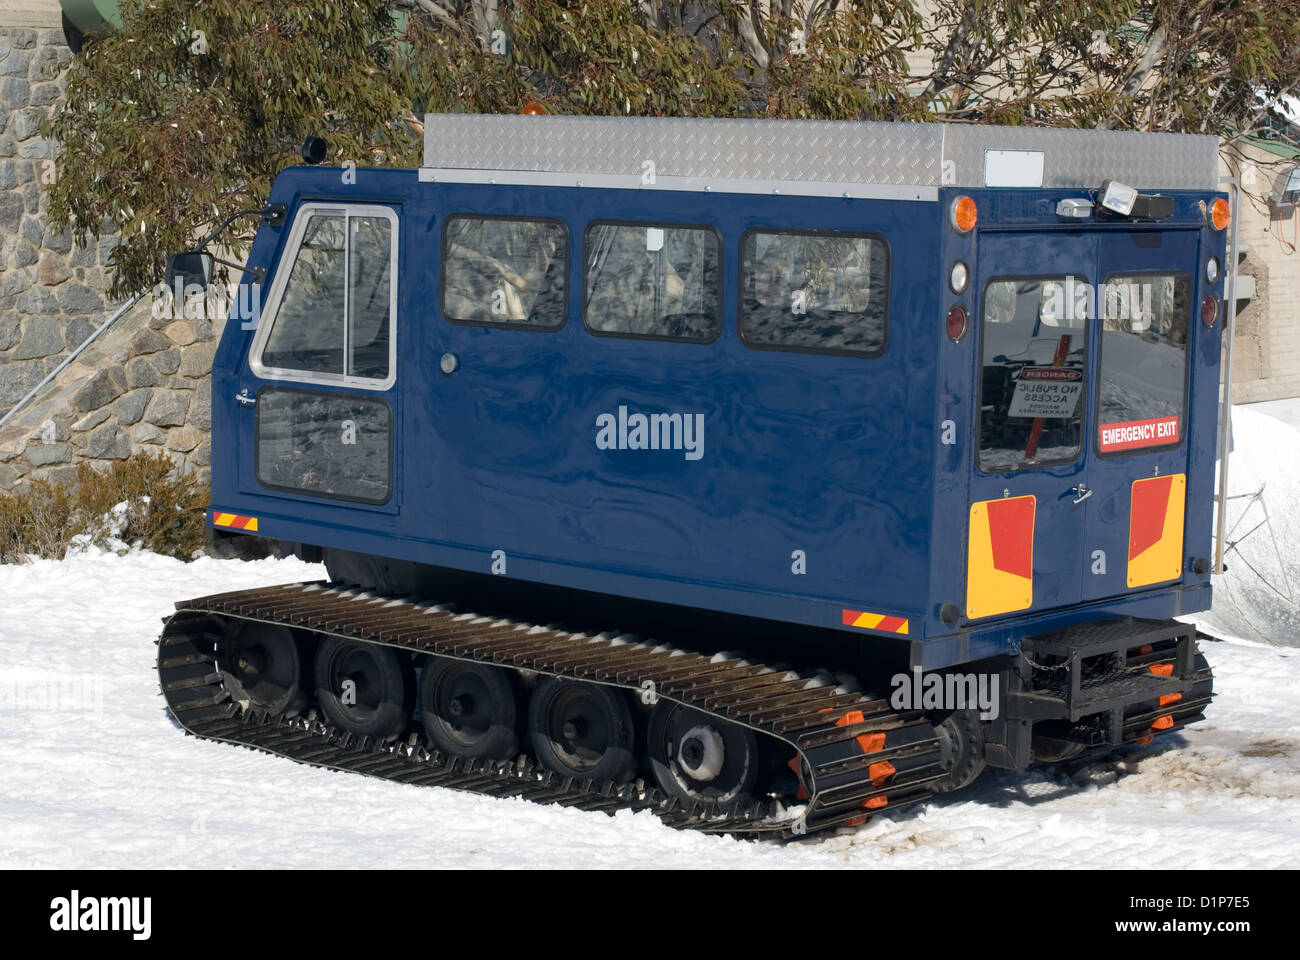 A snow transport vehicle parked outside a chalet at a resort in the Australian Alps Stock Photo